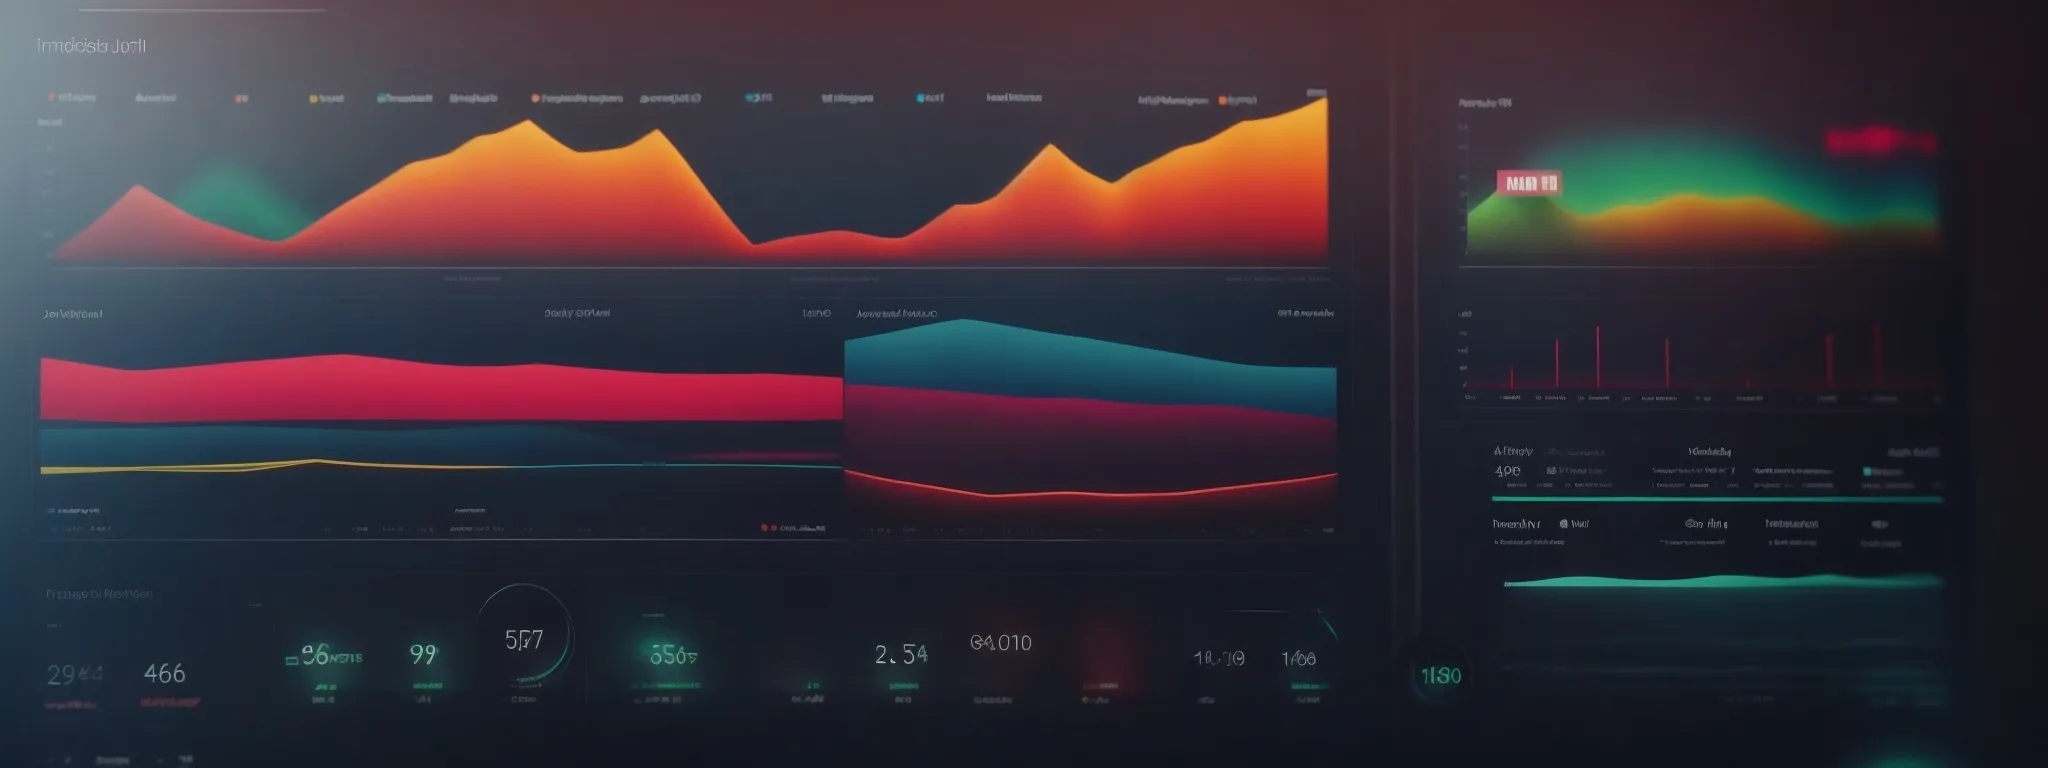 a sleek dashboard displays colorful charts and graphs analyzing email campaign results.